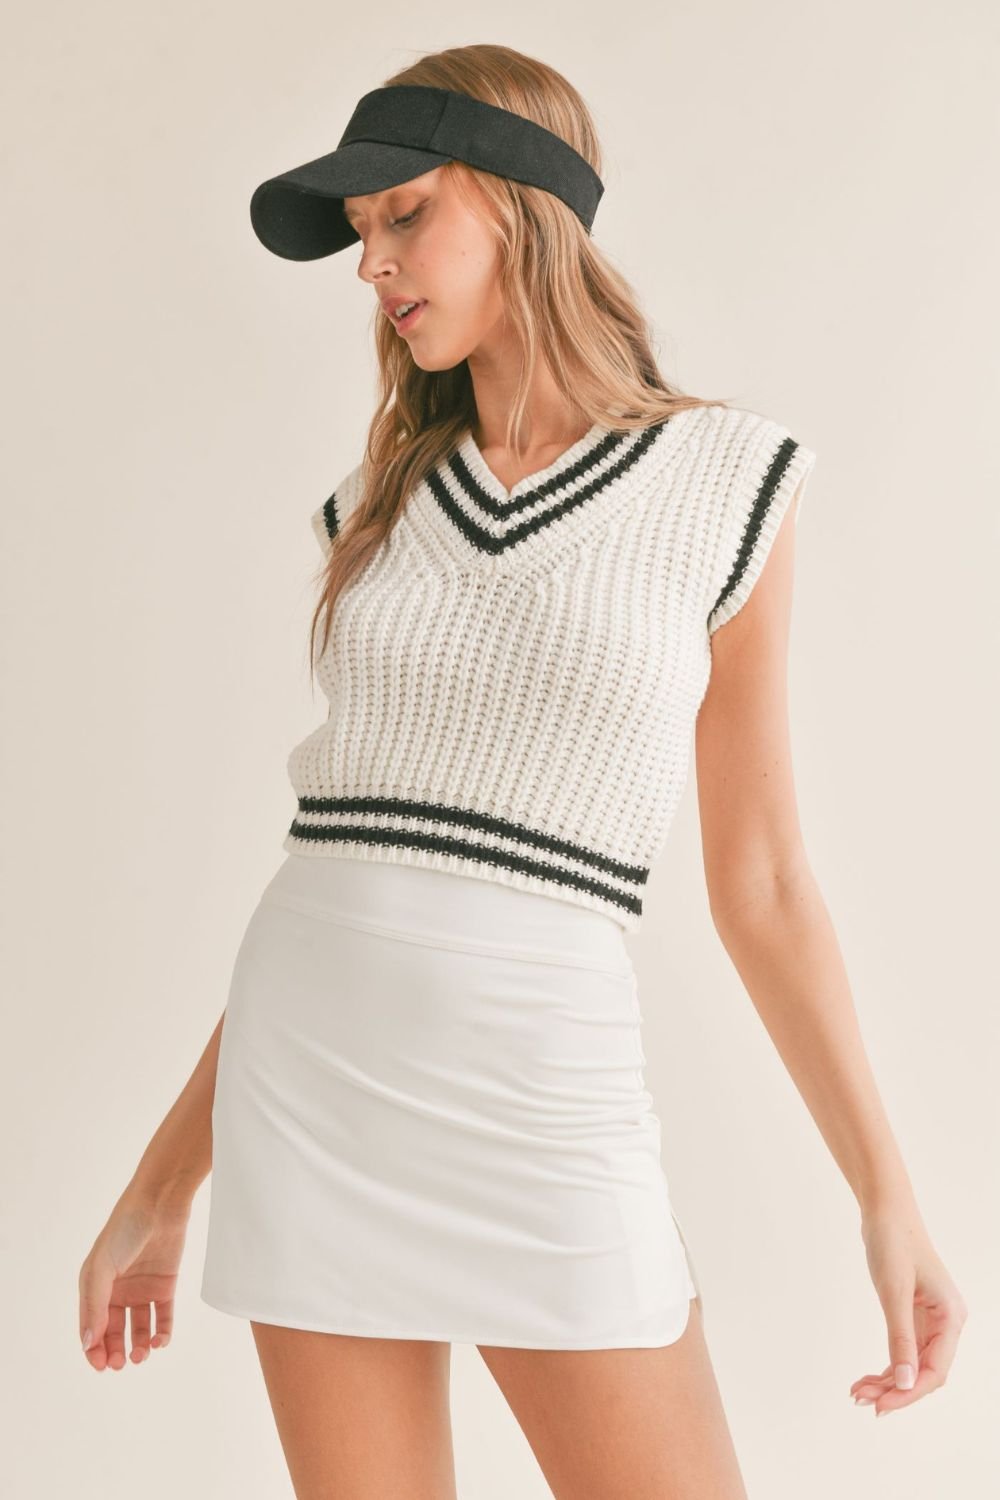 Women's Country Club V-Neck Sweater Vest | Ivory Black - Women's Shirts & Tops - Blooming Daily